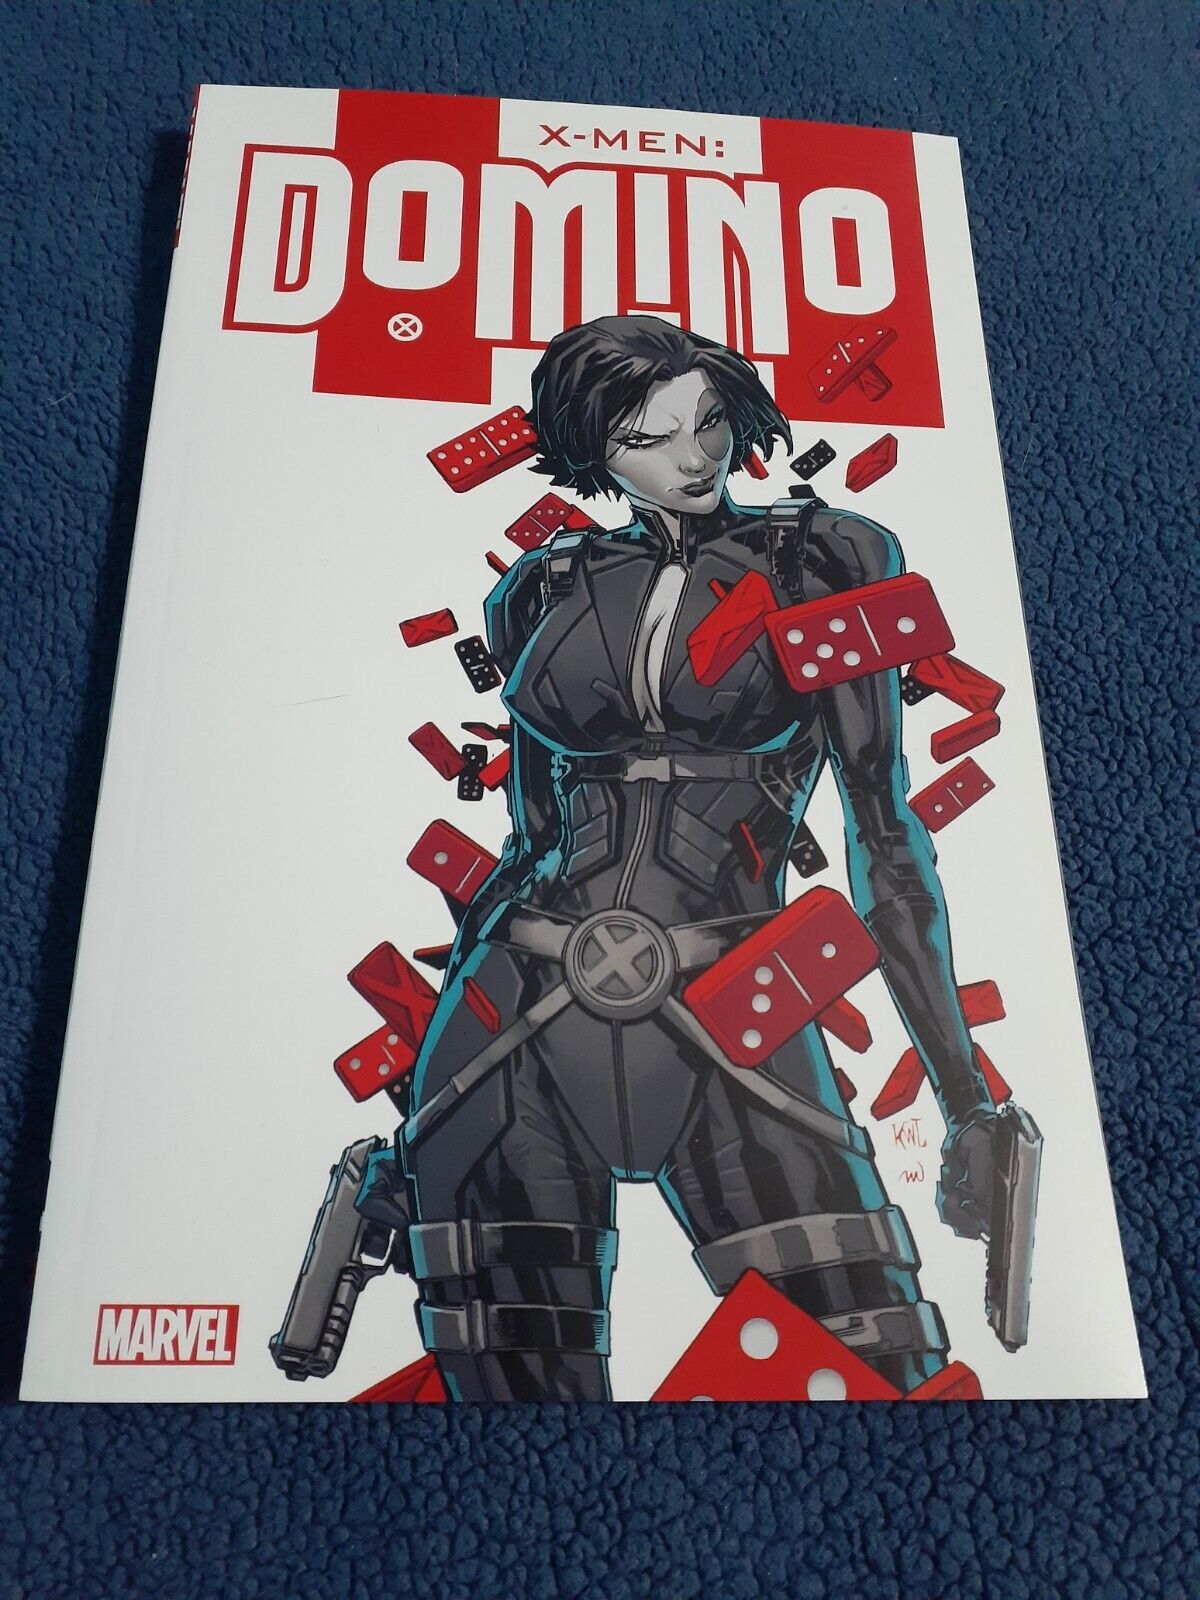 X-Men: Domino Trade Paperback X-Force Marvel Comics Deadpool Wolverine Cable